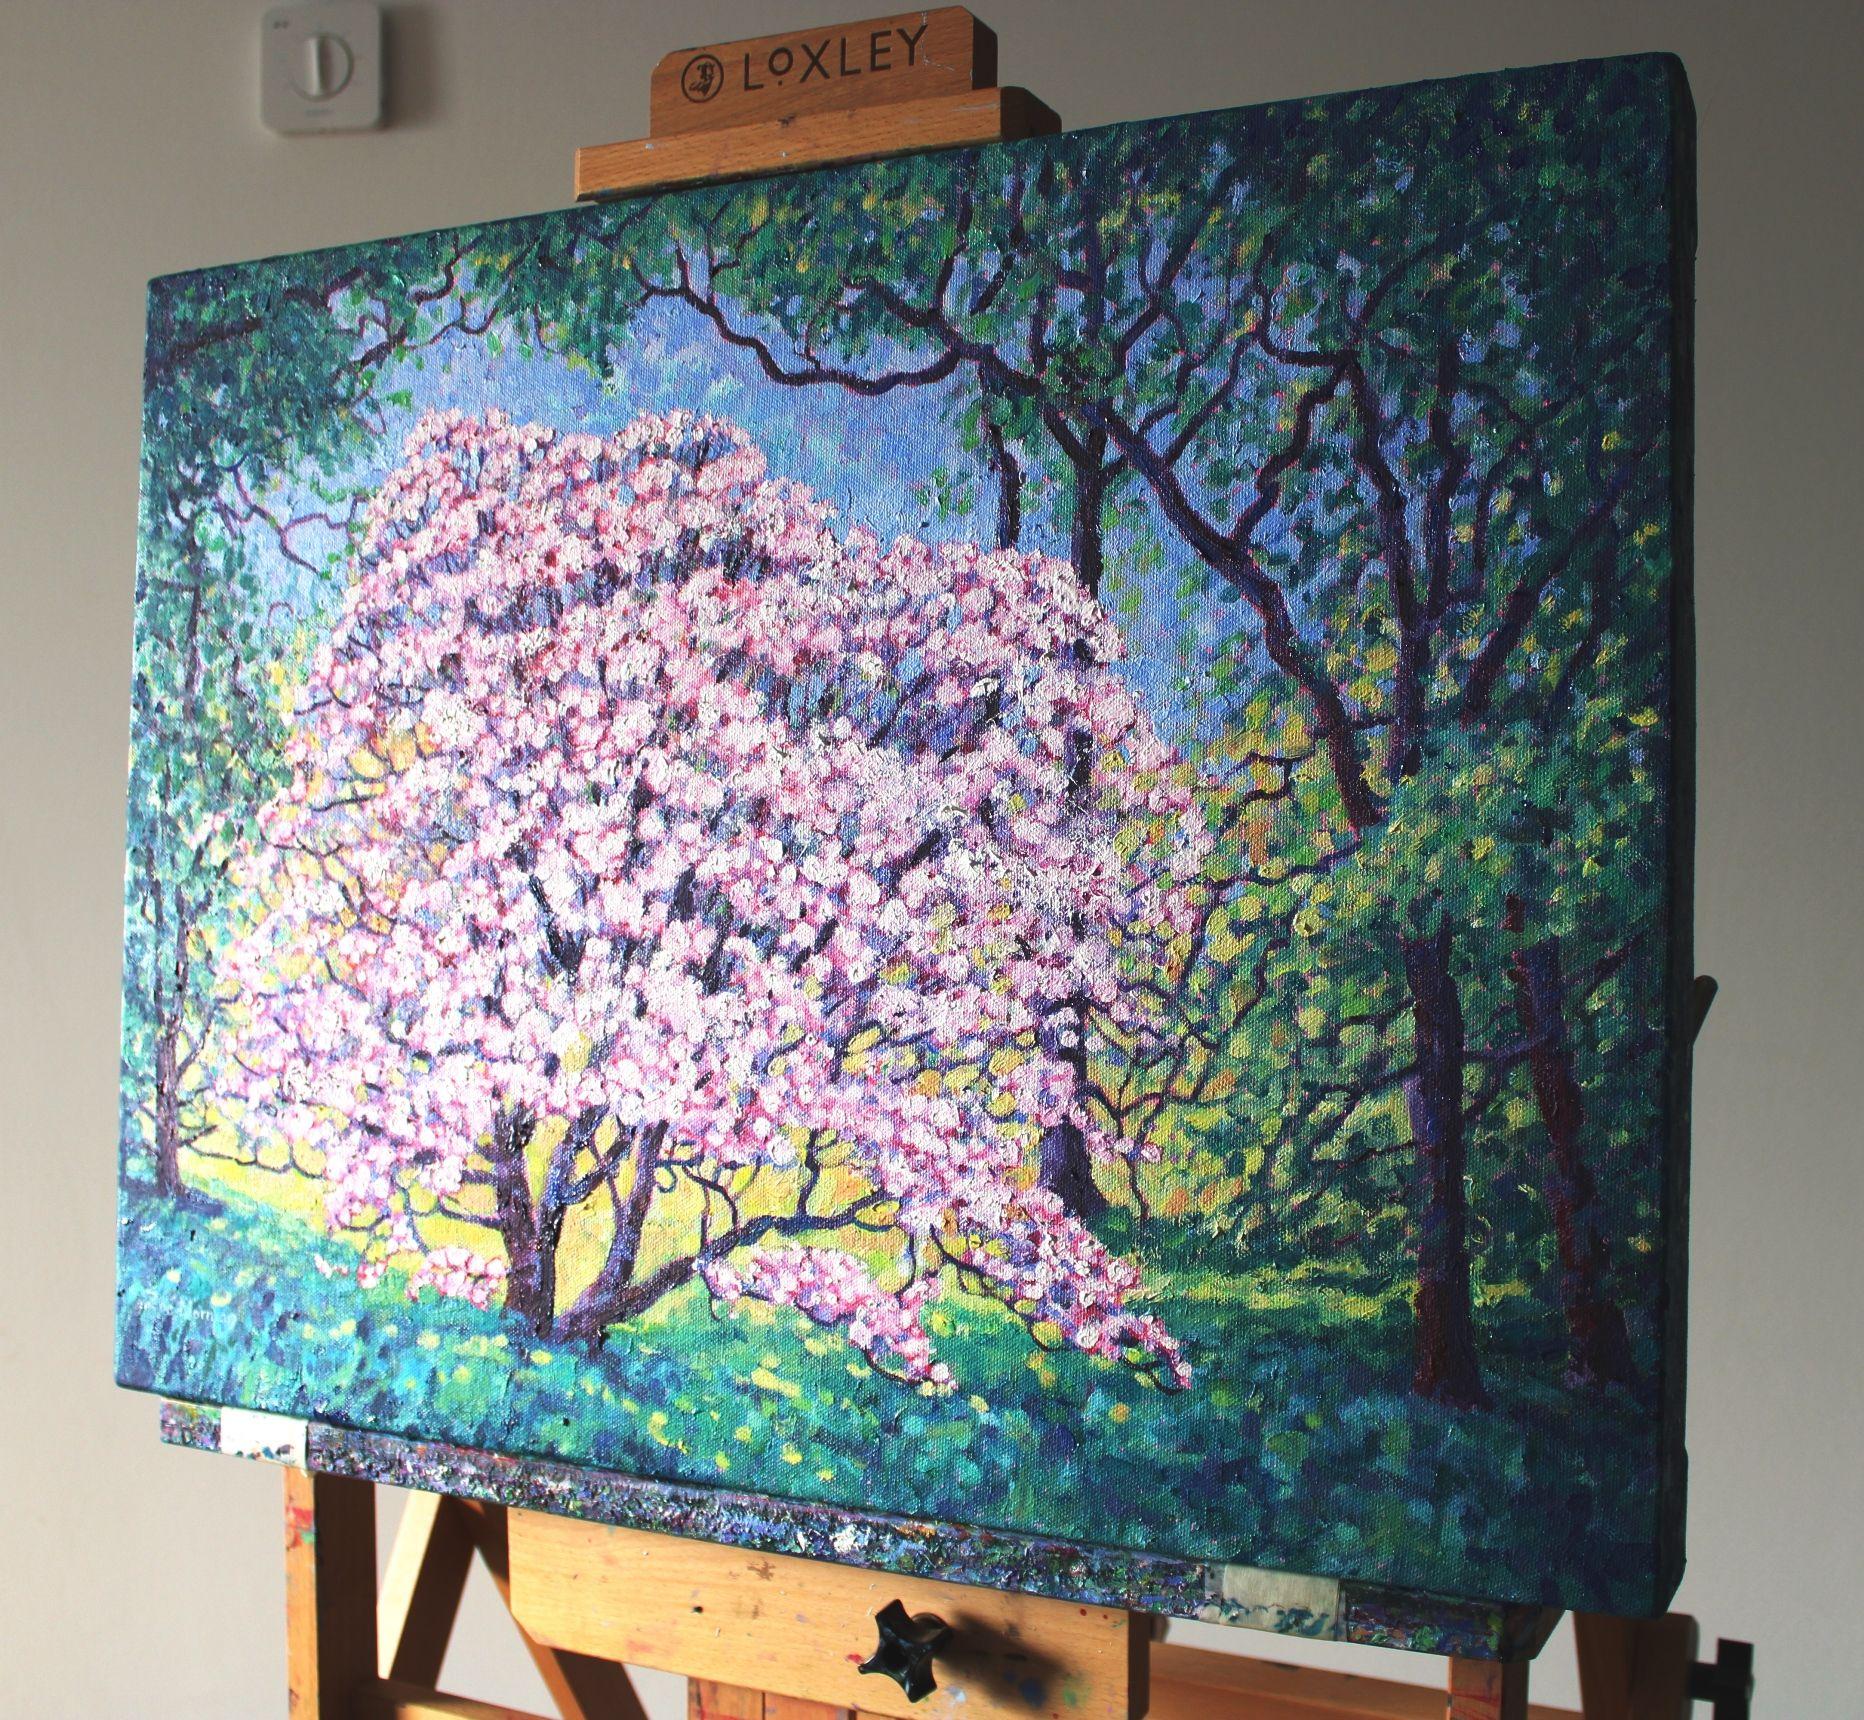 Contemporary Impressionism.    A Spring country walk revealed this stunning pink blossom tree lit from behind by the morning sun. The foamy blossom and foliage was painted with thick impasto paint and vibrant colours. The painting continues around